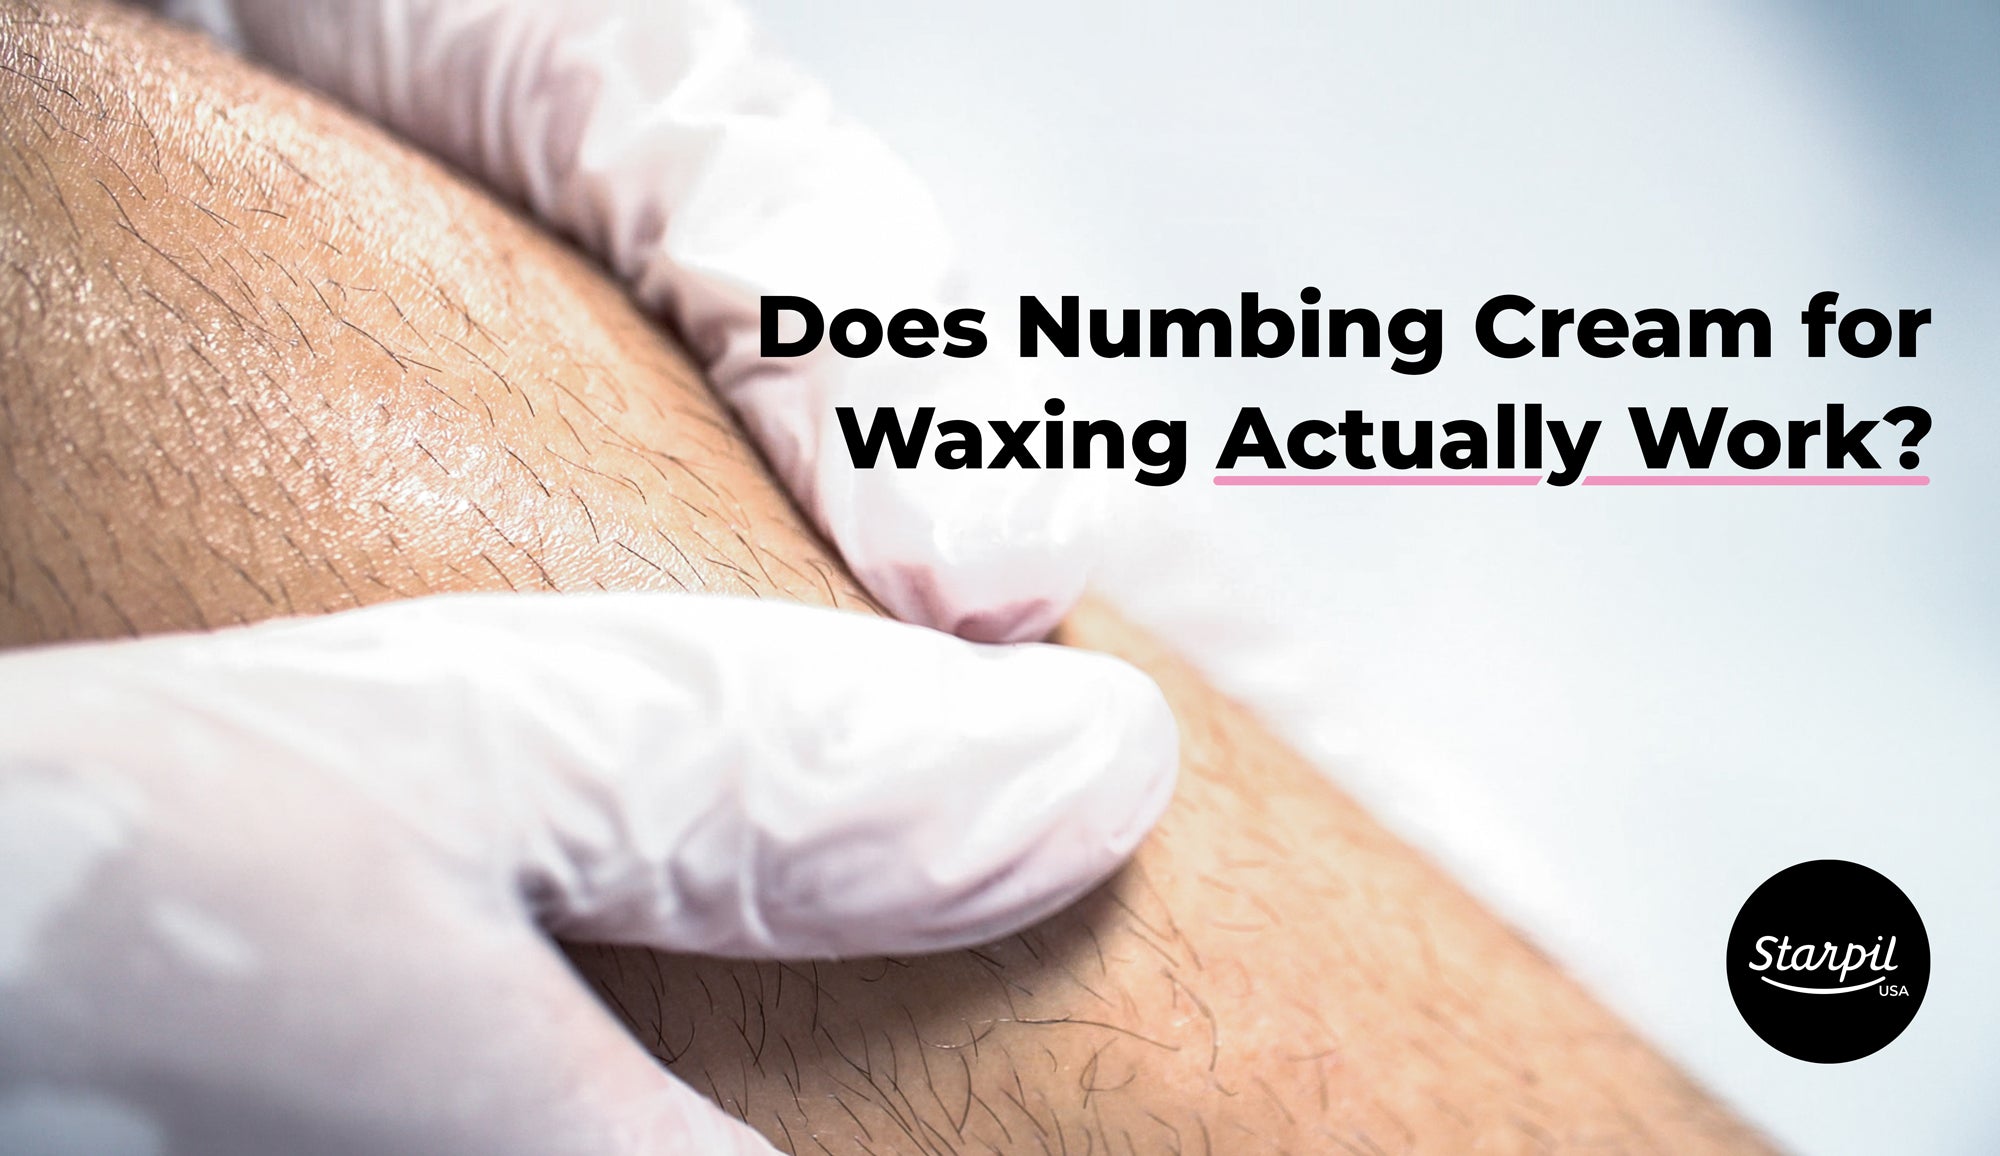 Does Numbing Cream Work for Waxing?